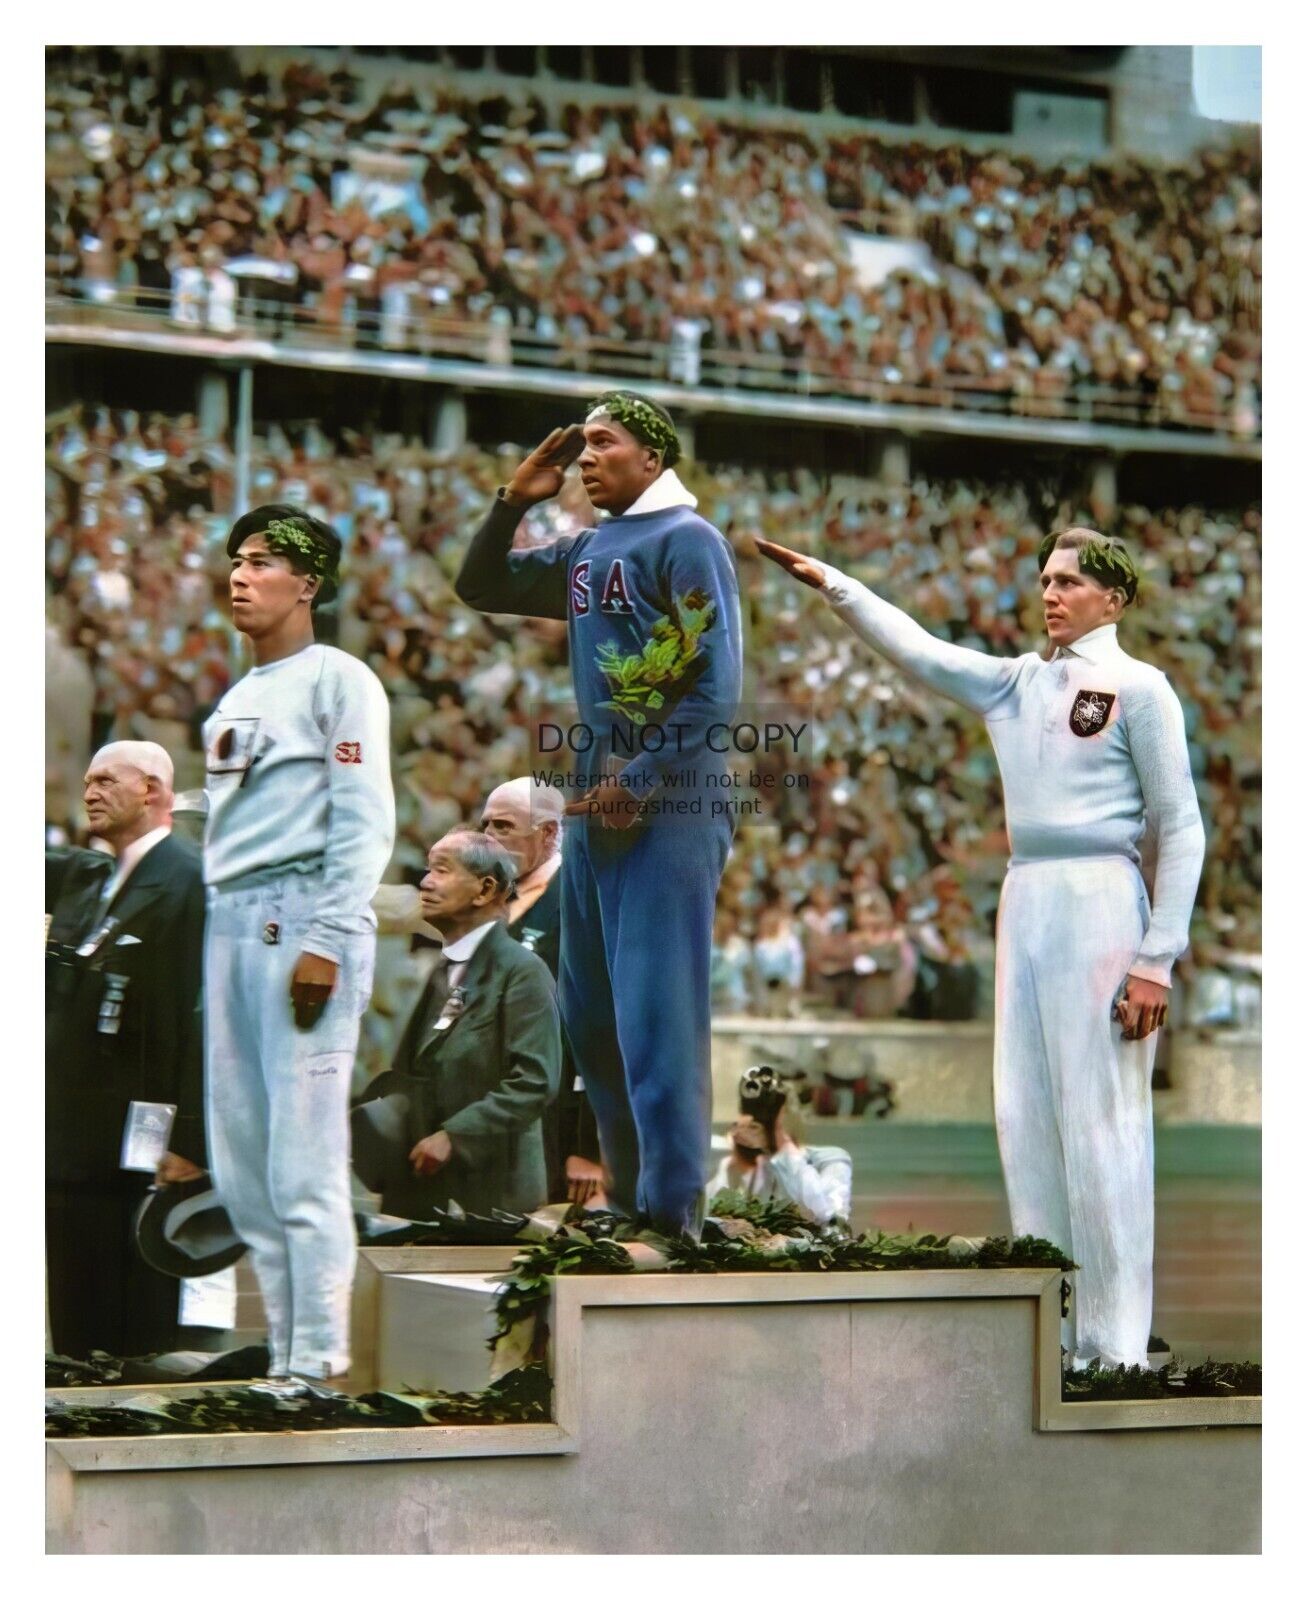 JESSIE OWENS STANDING ON PODIUM AT 1936 OLYMPICS BERLIN GERMANY 8X10 COLOR PHOTO